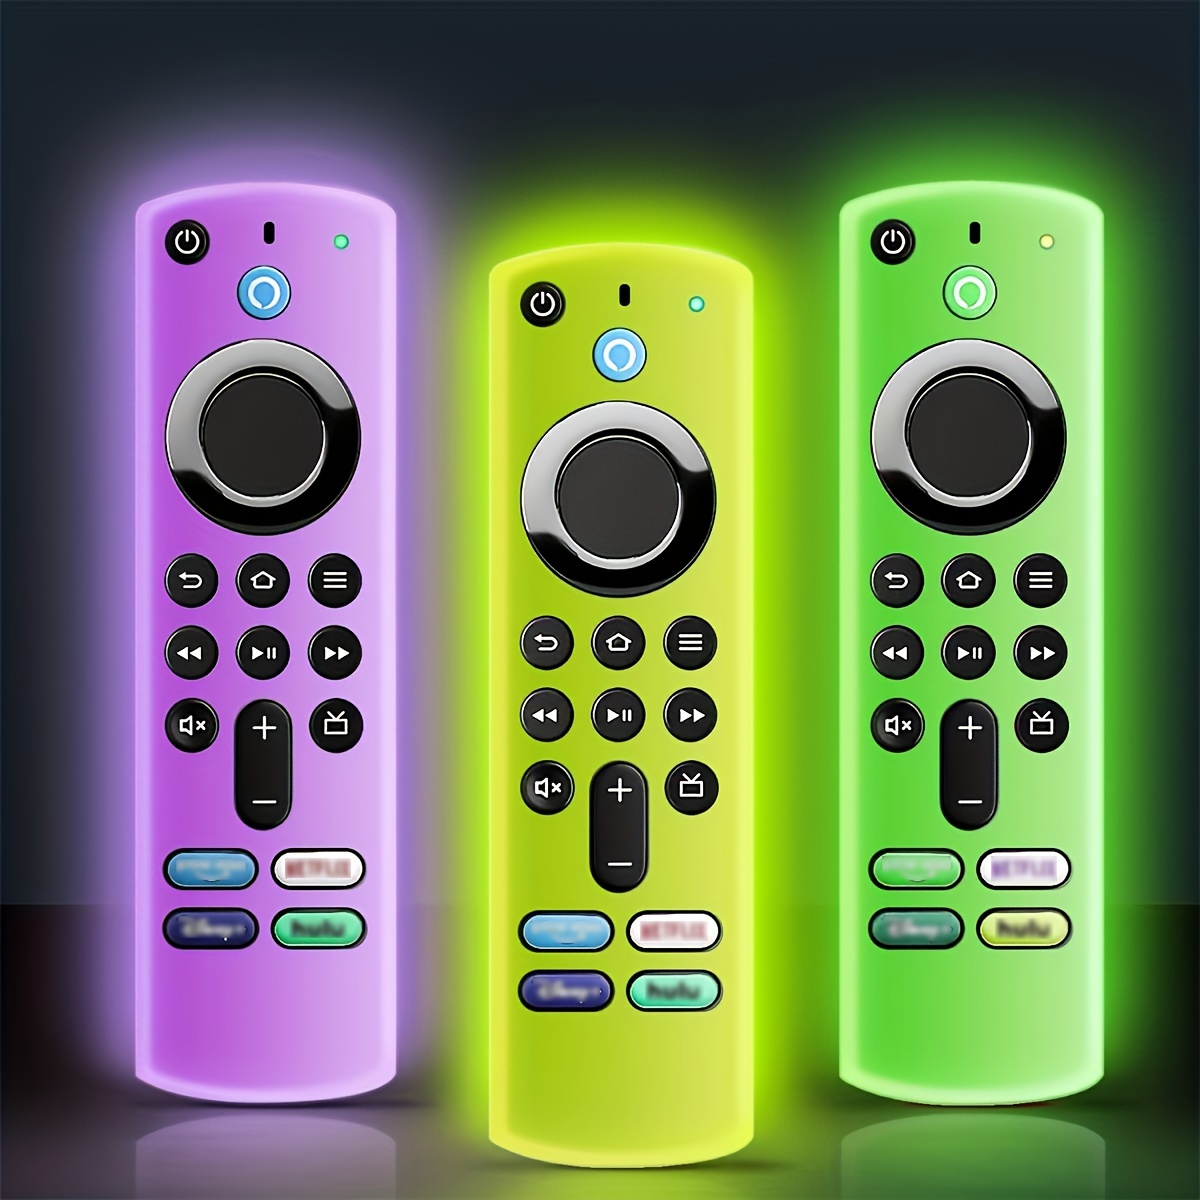 

1 Piece Firestick Remote Control Set With Lanyard Glow In The Night, Tv 4k Remote Control Set Third Generation, Purple Blue Green